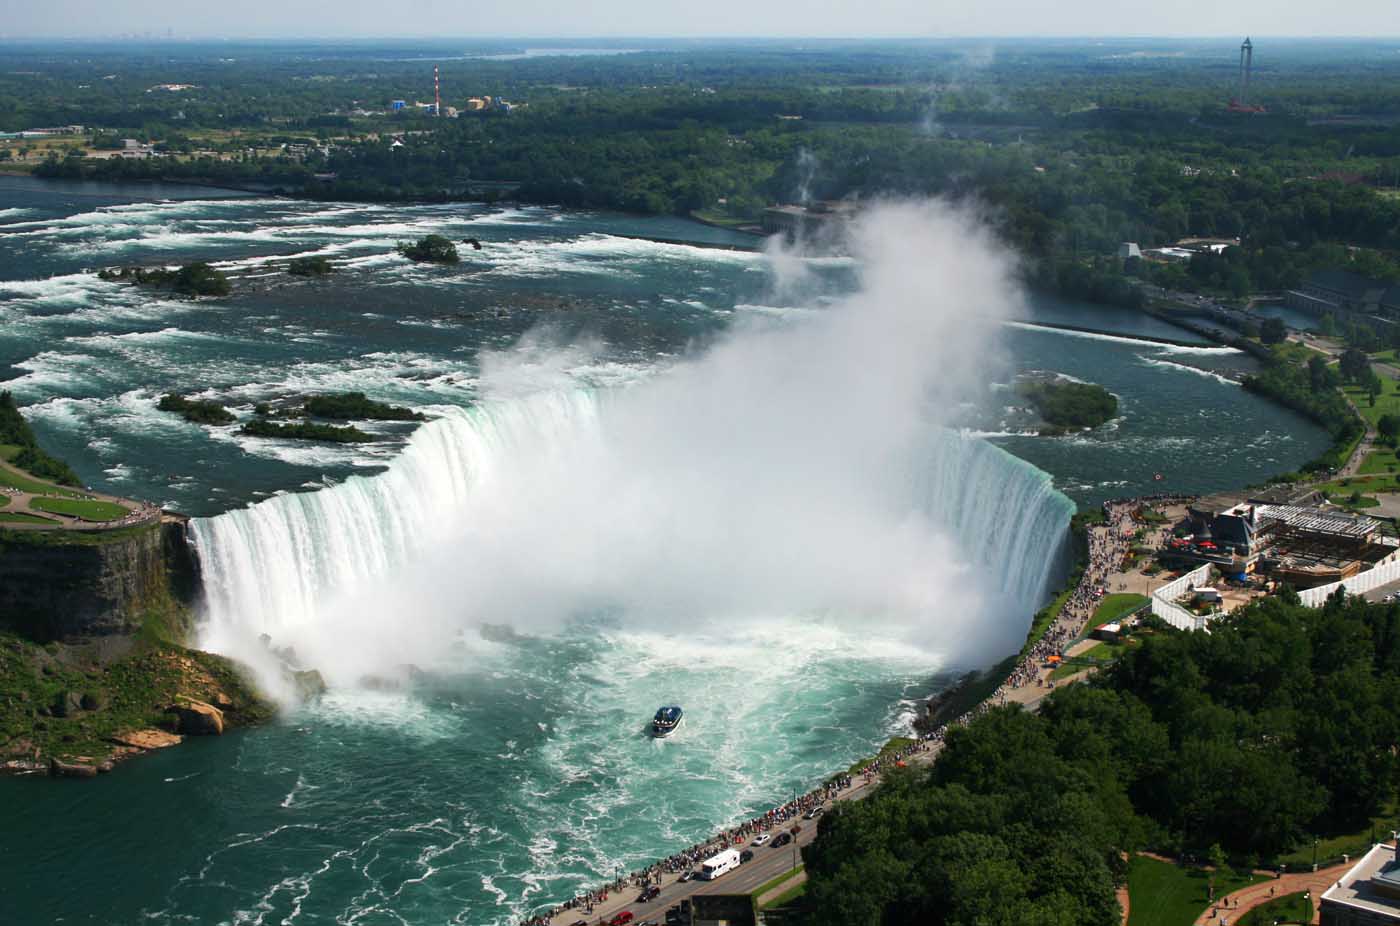 Niagara Falls Travel Cost Average Price Of A Vacation To Niagara Falls Food Meal Budget Daily Weekly Expenses Budgetyourtrip Com